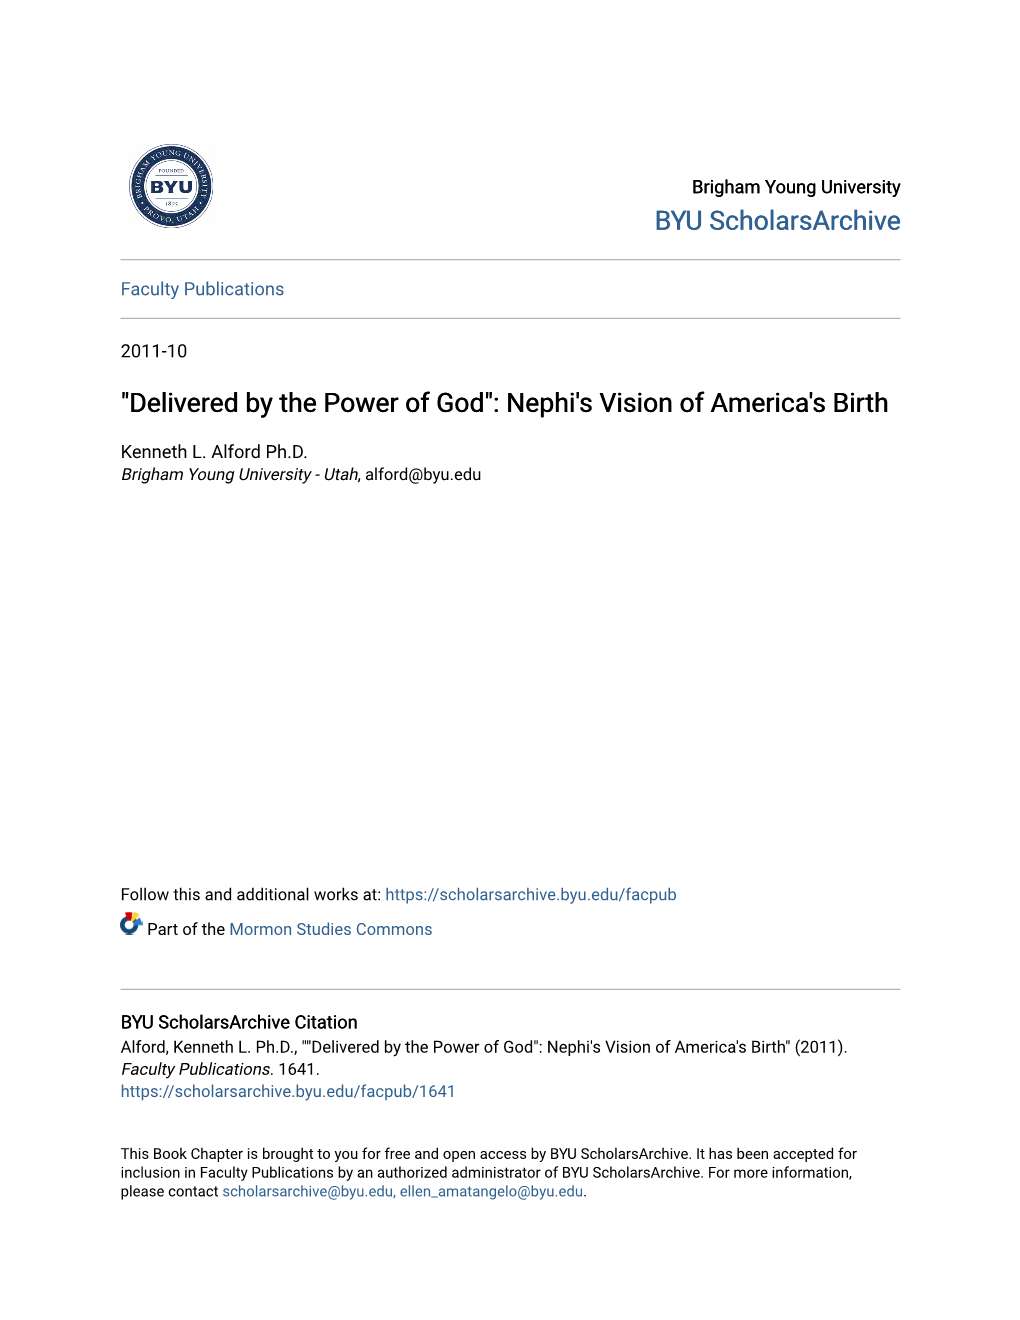 Delivered by the Power of God": Nephi's Vision of America's Birth